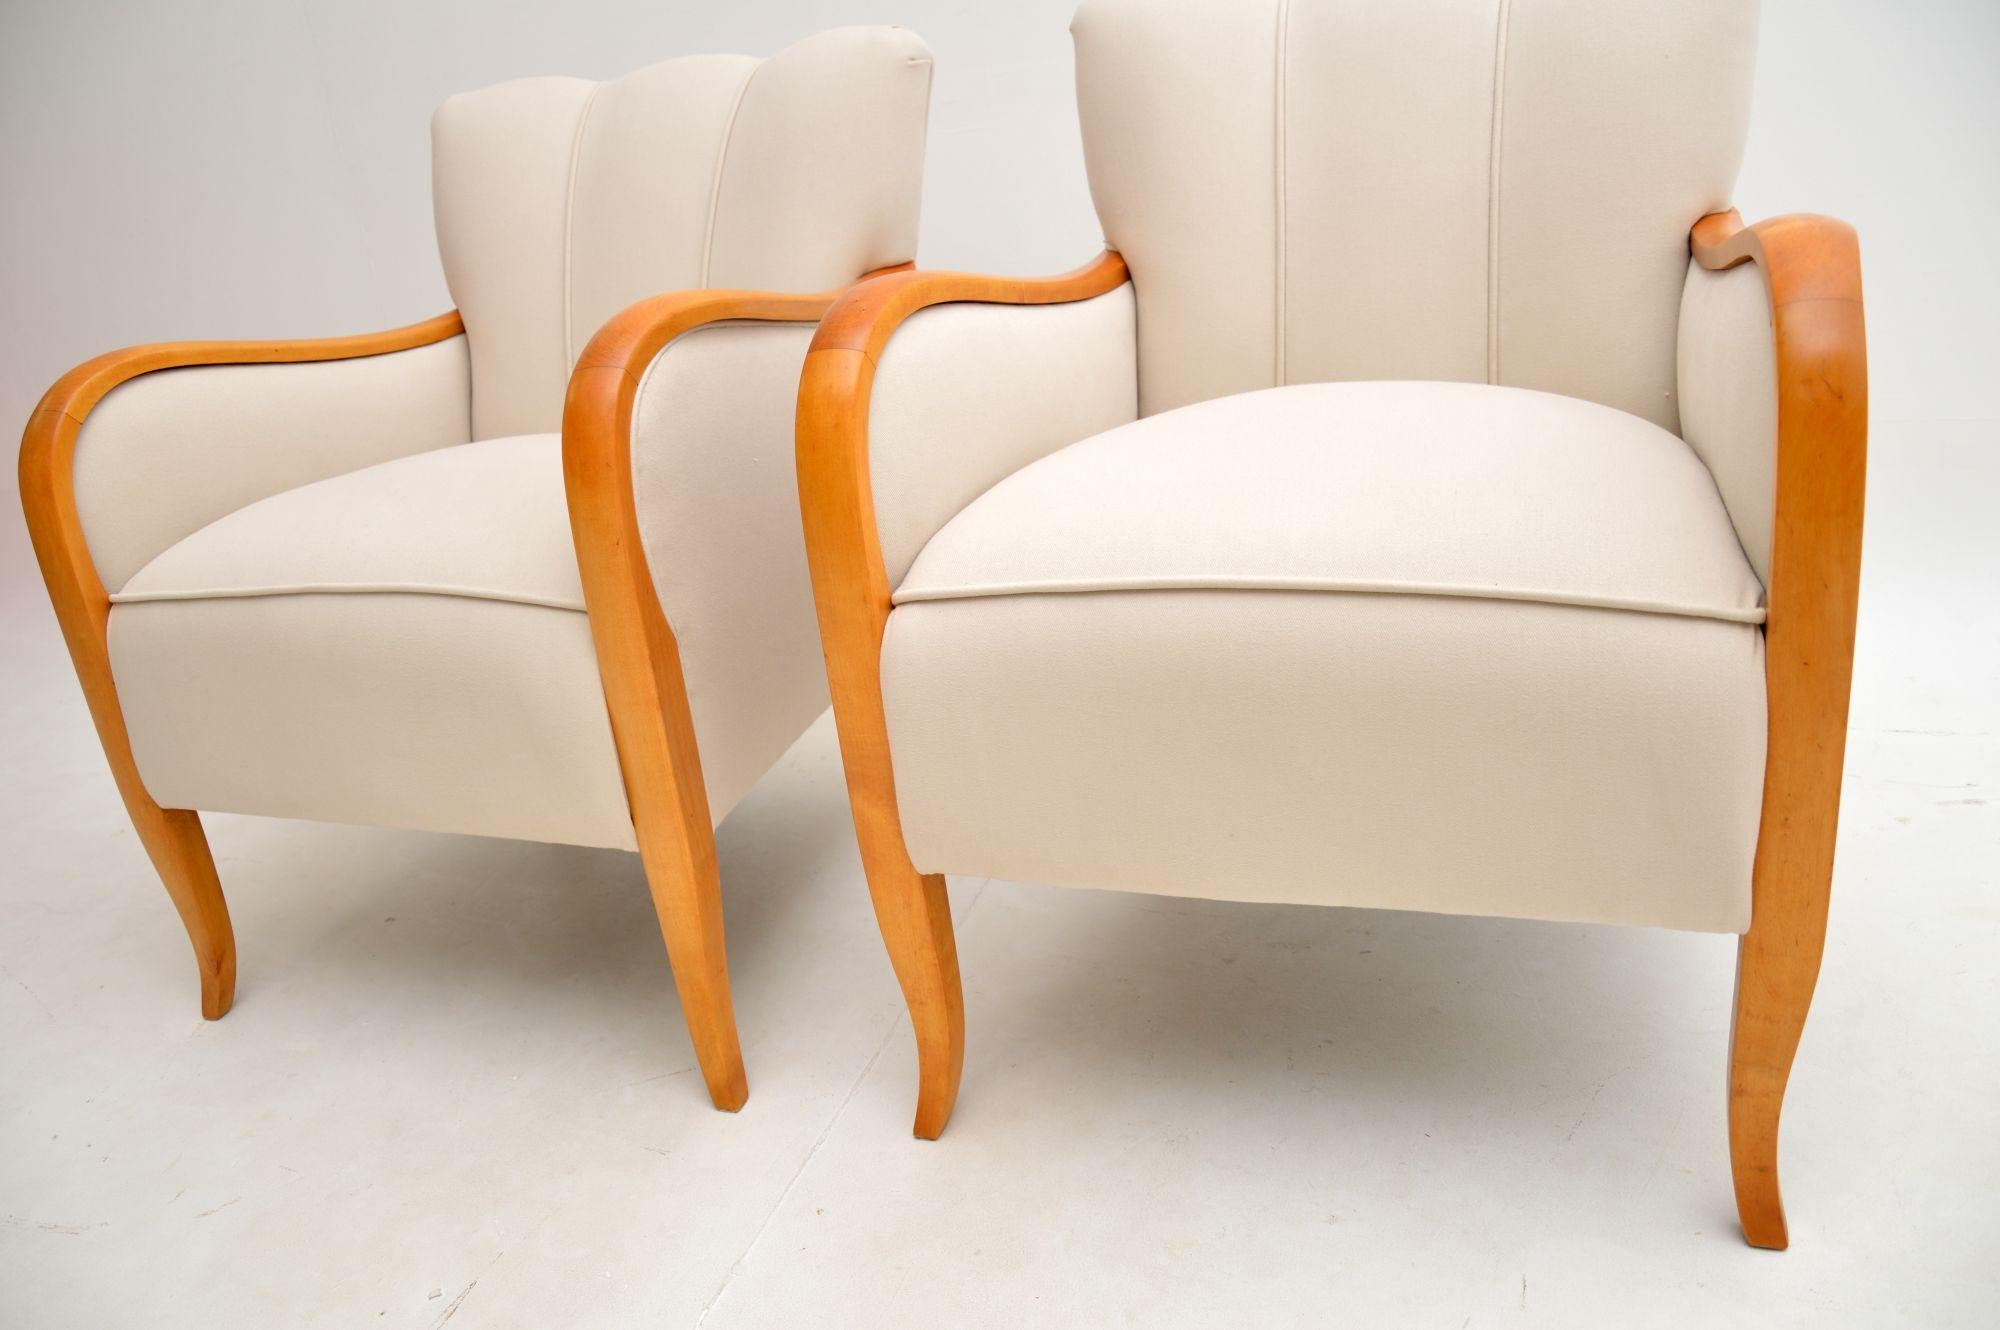 Pair of Art Deco Armchairs in Satin Birch For Sale 1